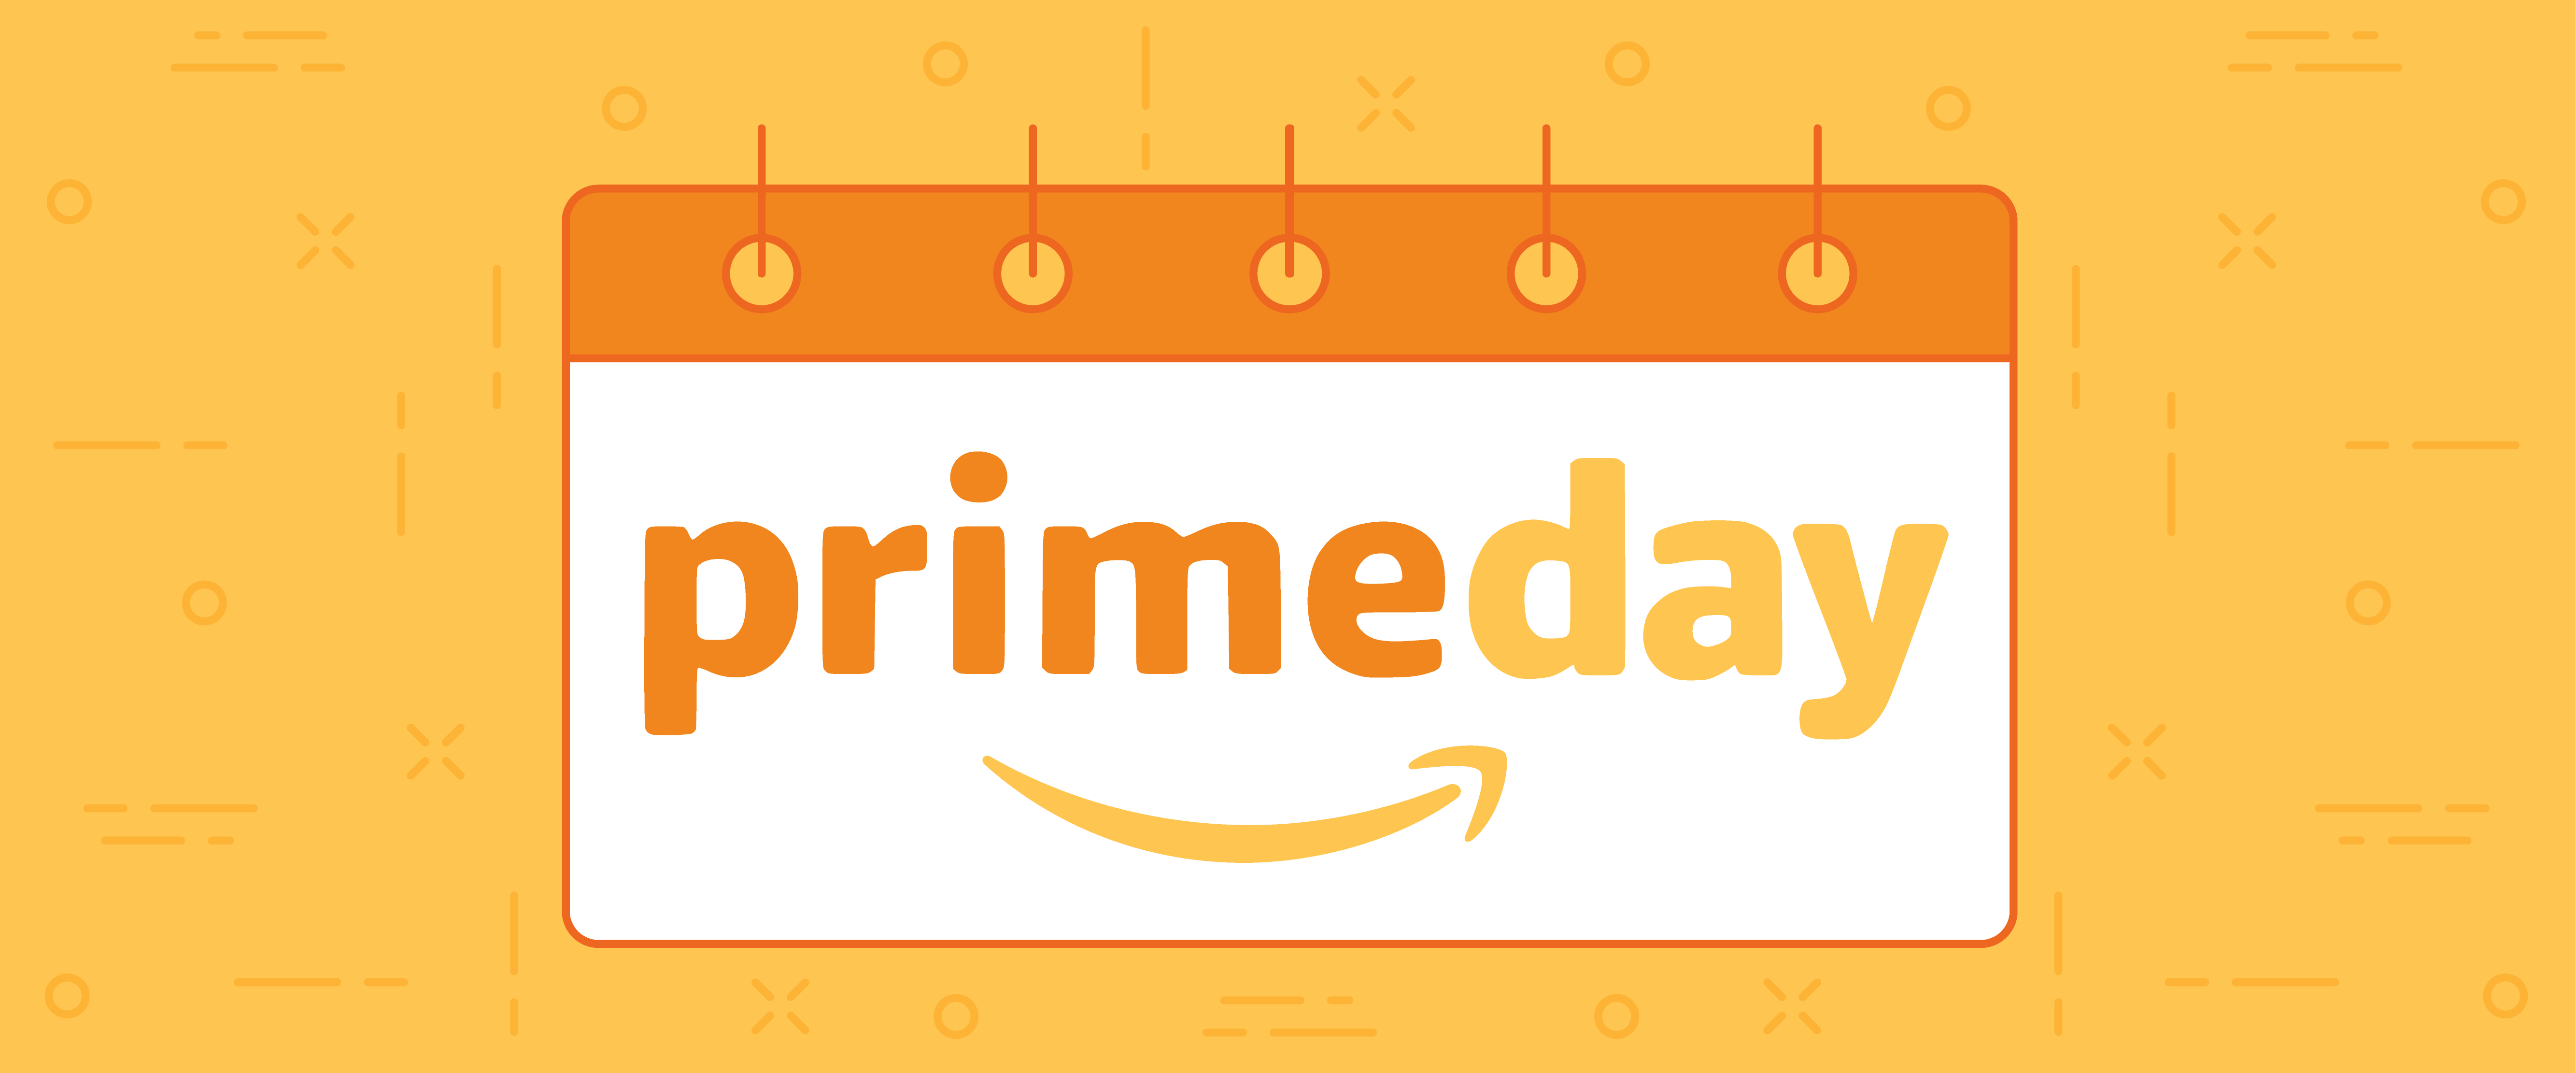 A RecordBreaking Prime Day for SupplyKick and Amazon